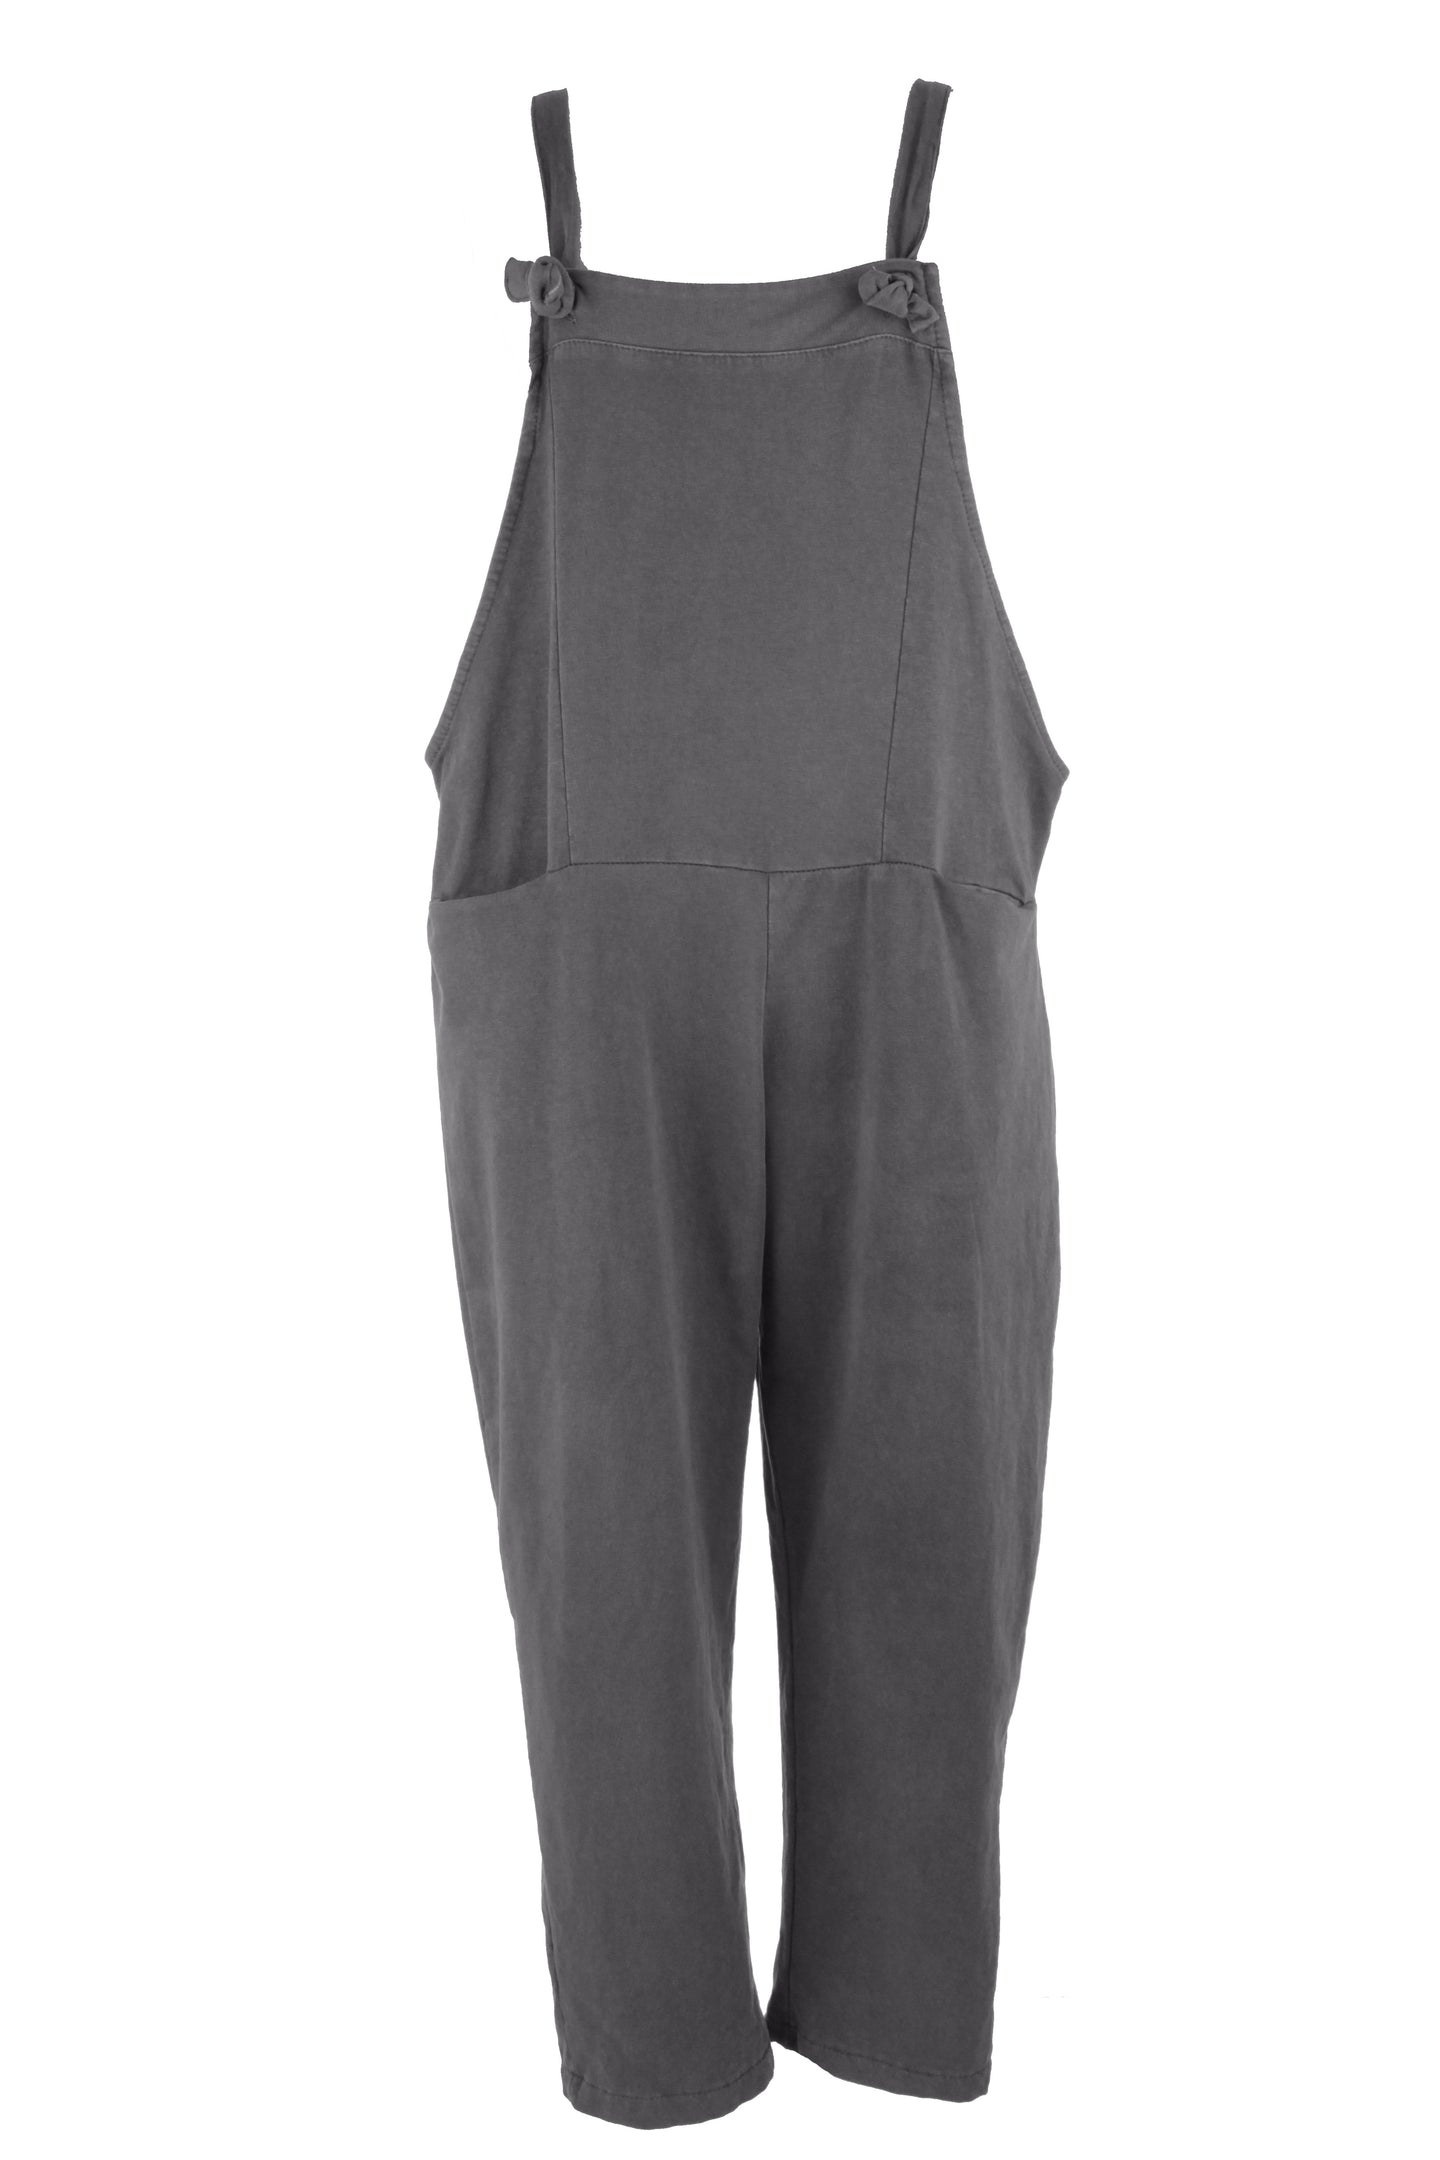 Made in Italy Pabo Jersey Dungarees